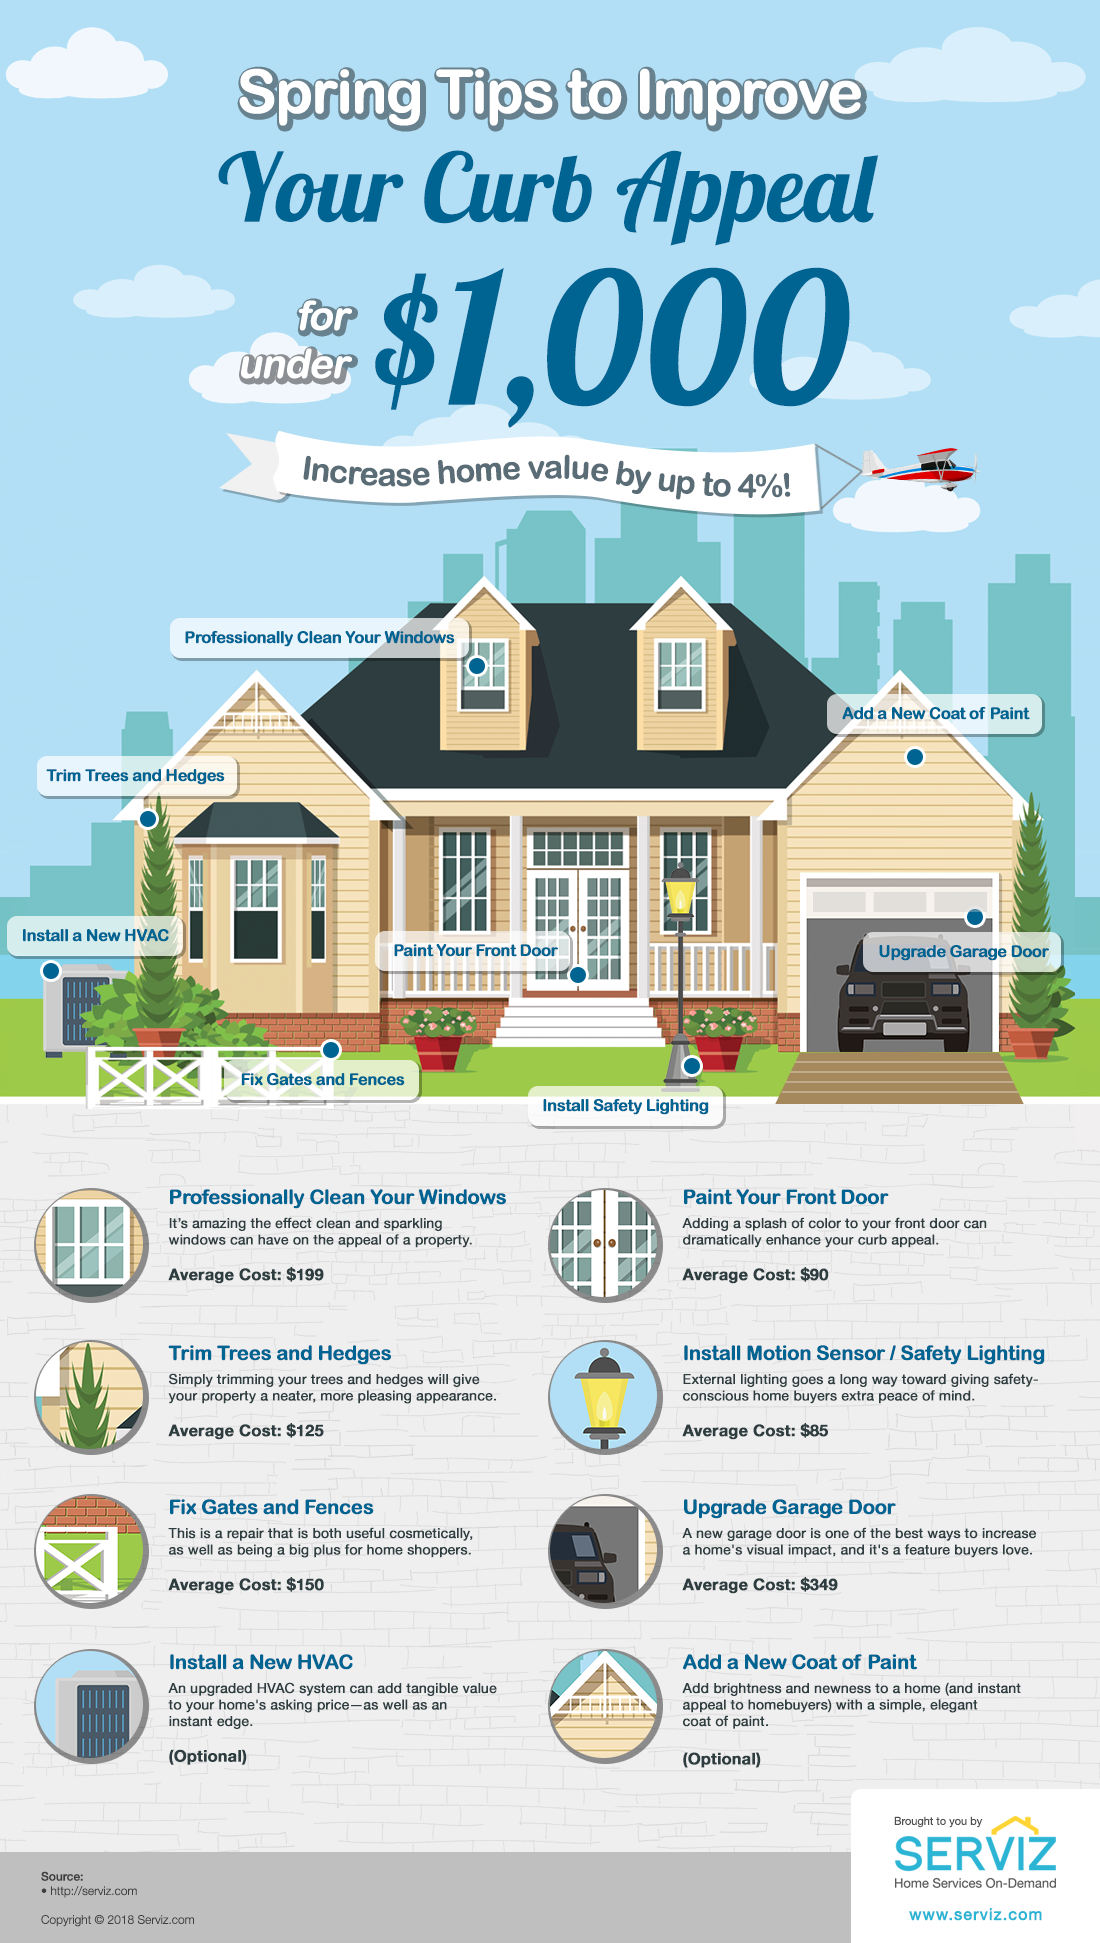 SERVIZ has also just released “Easy Spring Upgrades Can Add Thousands to Your Property Value,” a real estate feature outlining affordable spring home upgrades that can raise home property values.